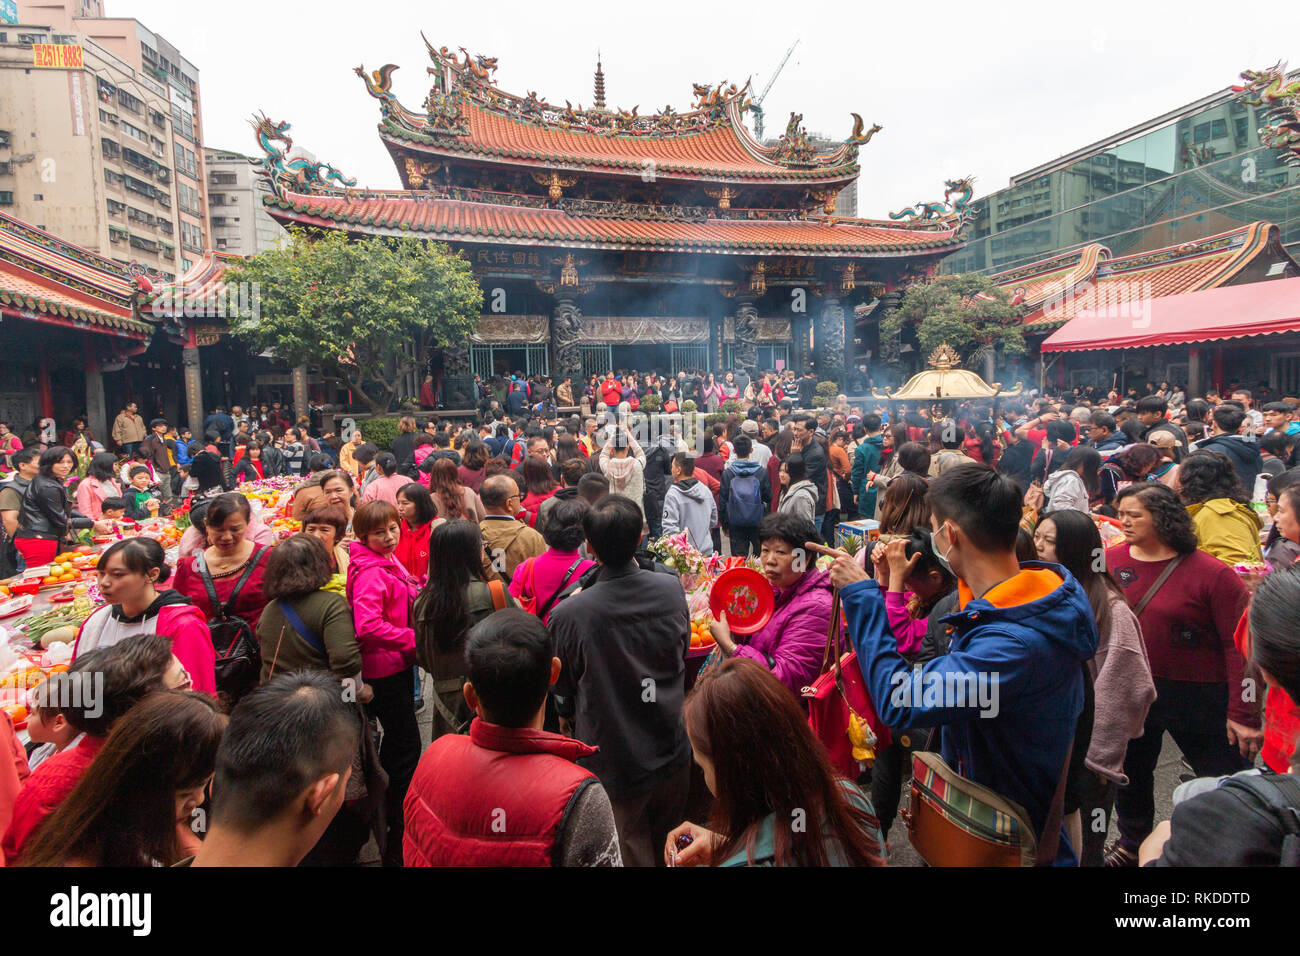 Smoke spreads around Longshan Temple in Taipei on Lunar New Year’s Day as visitors burn incense and pray to mark he arrival of the Year of the pig. Stock Photo